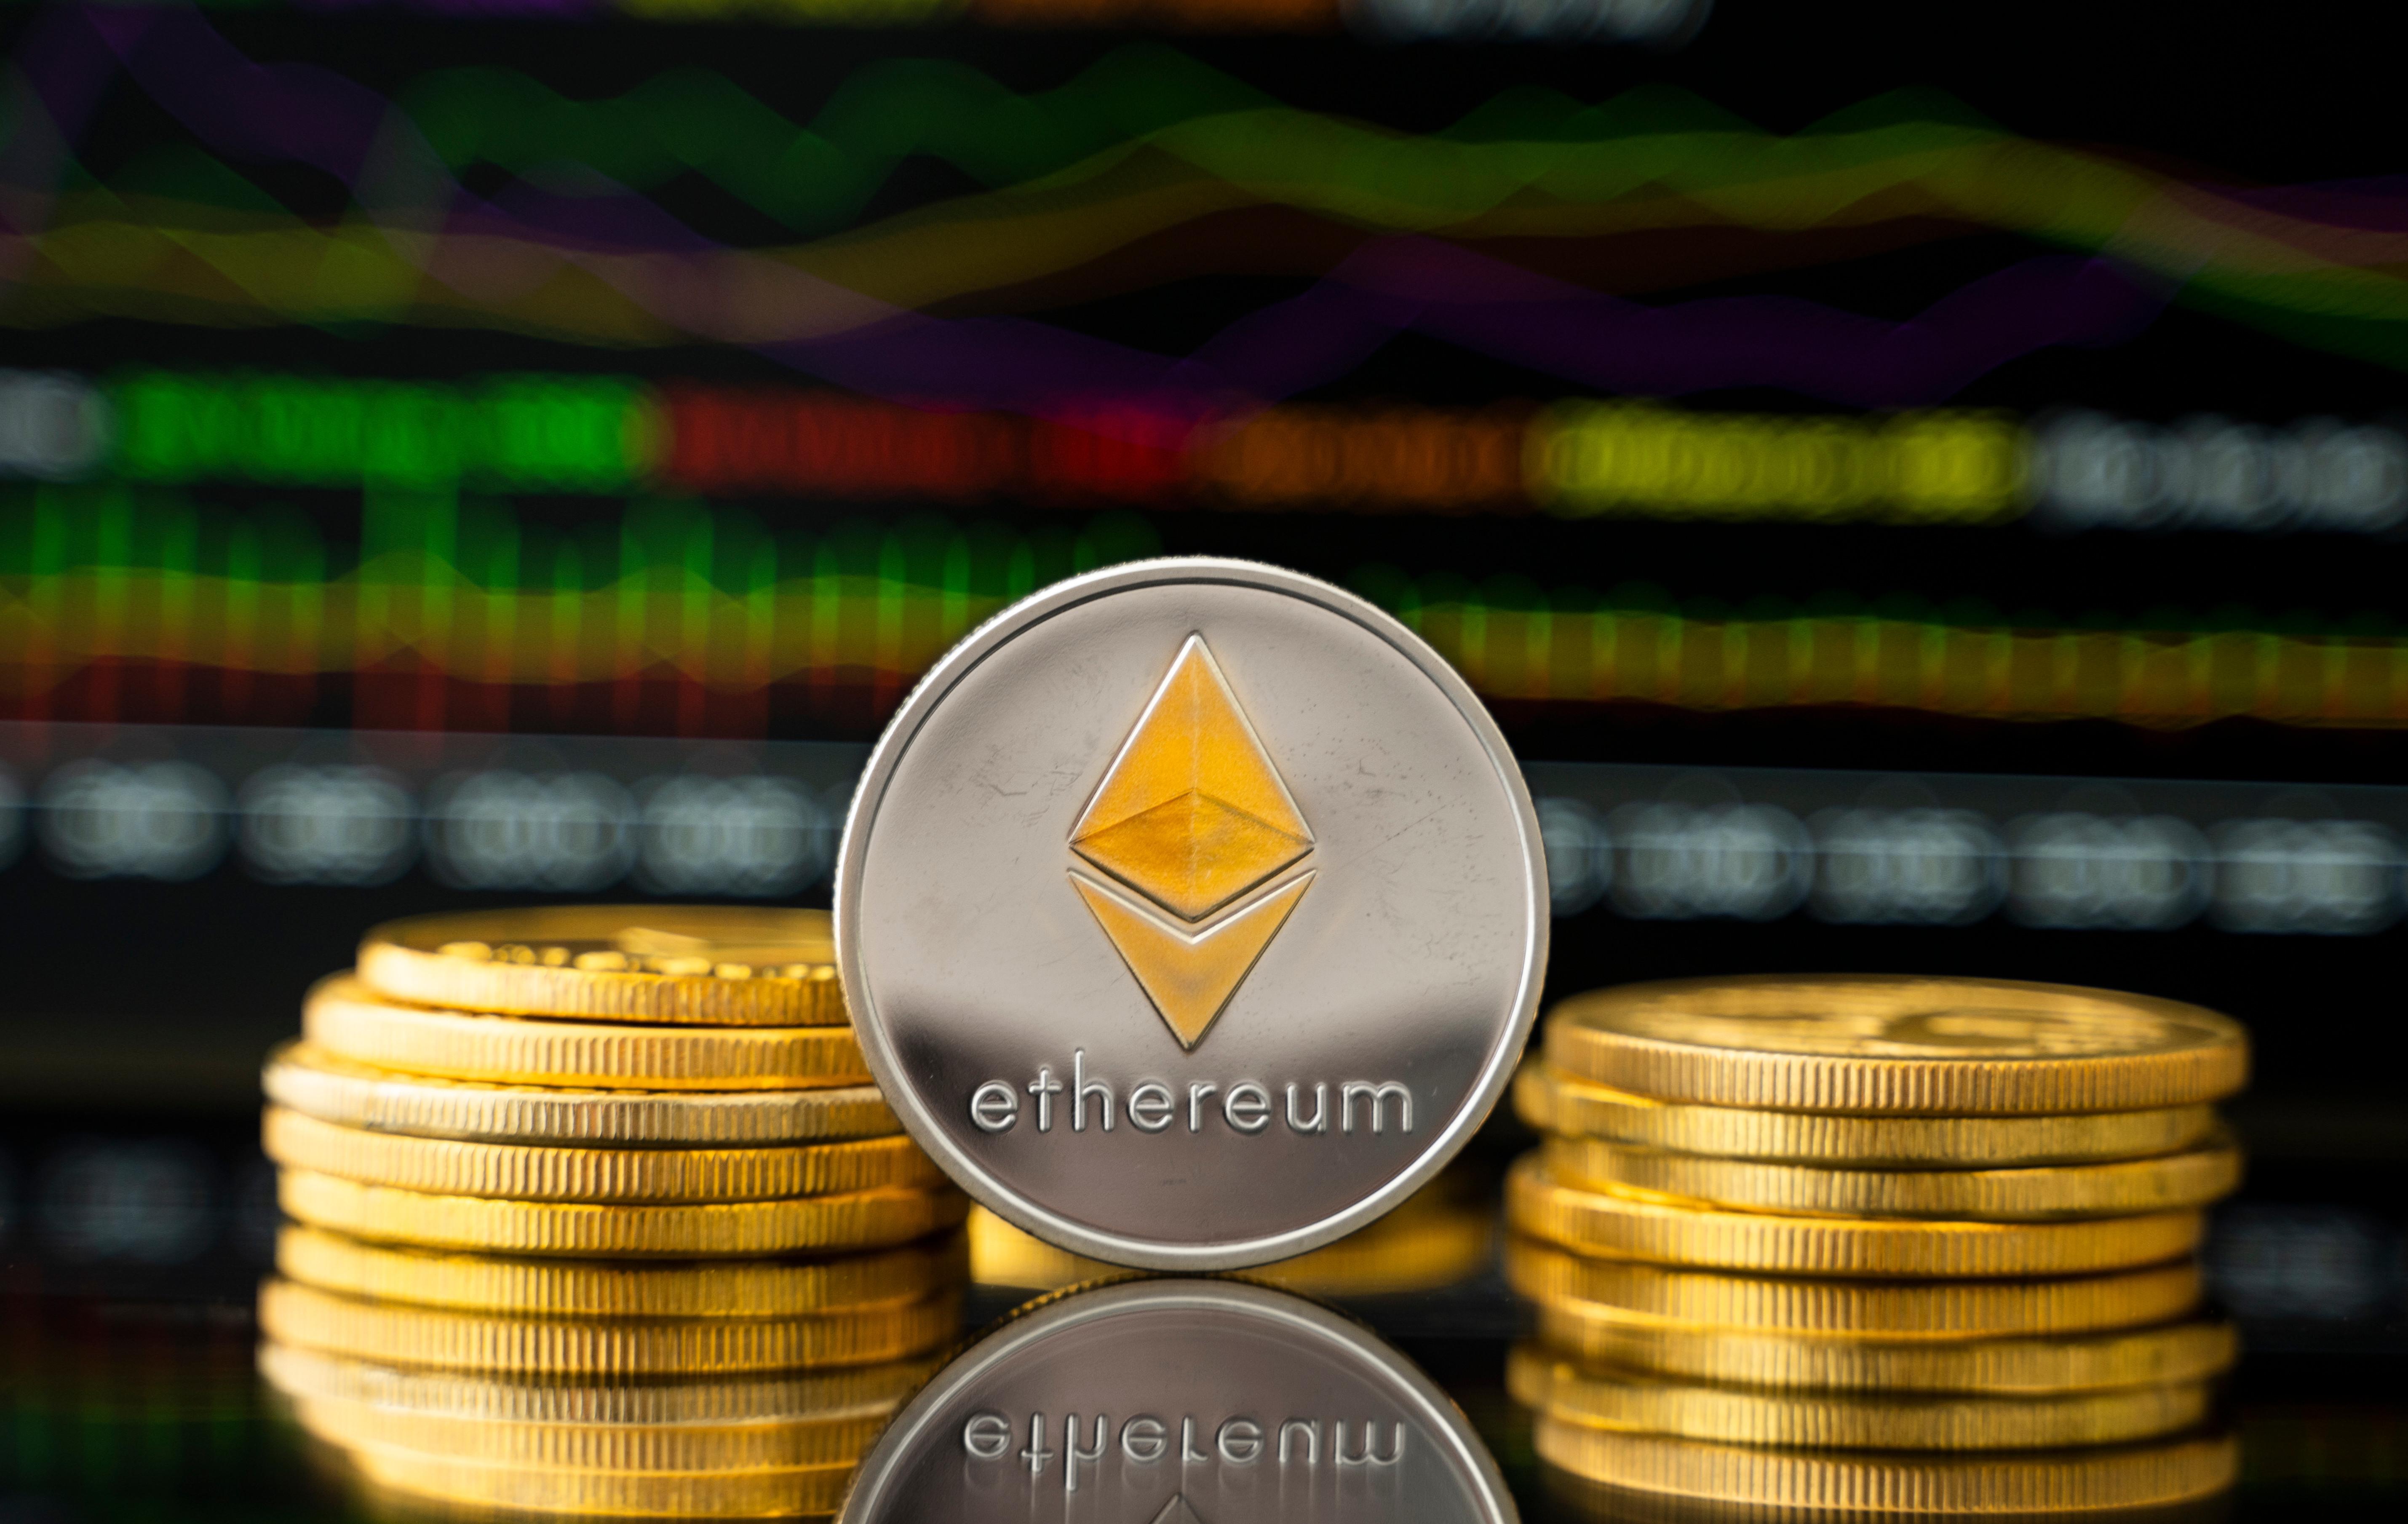 Ethereum price may remain range-bound despite the golden cross formation